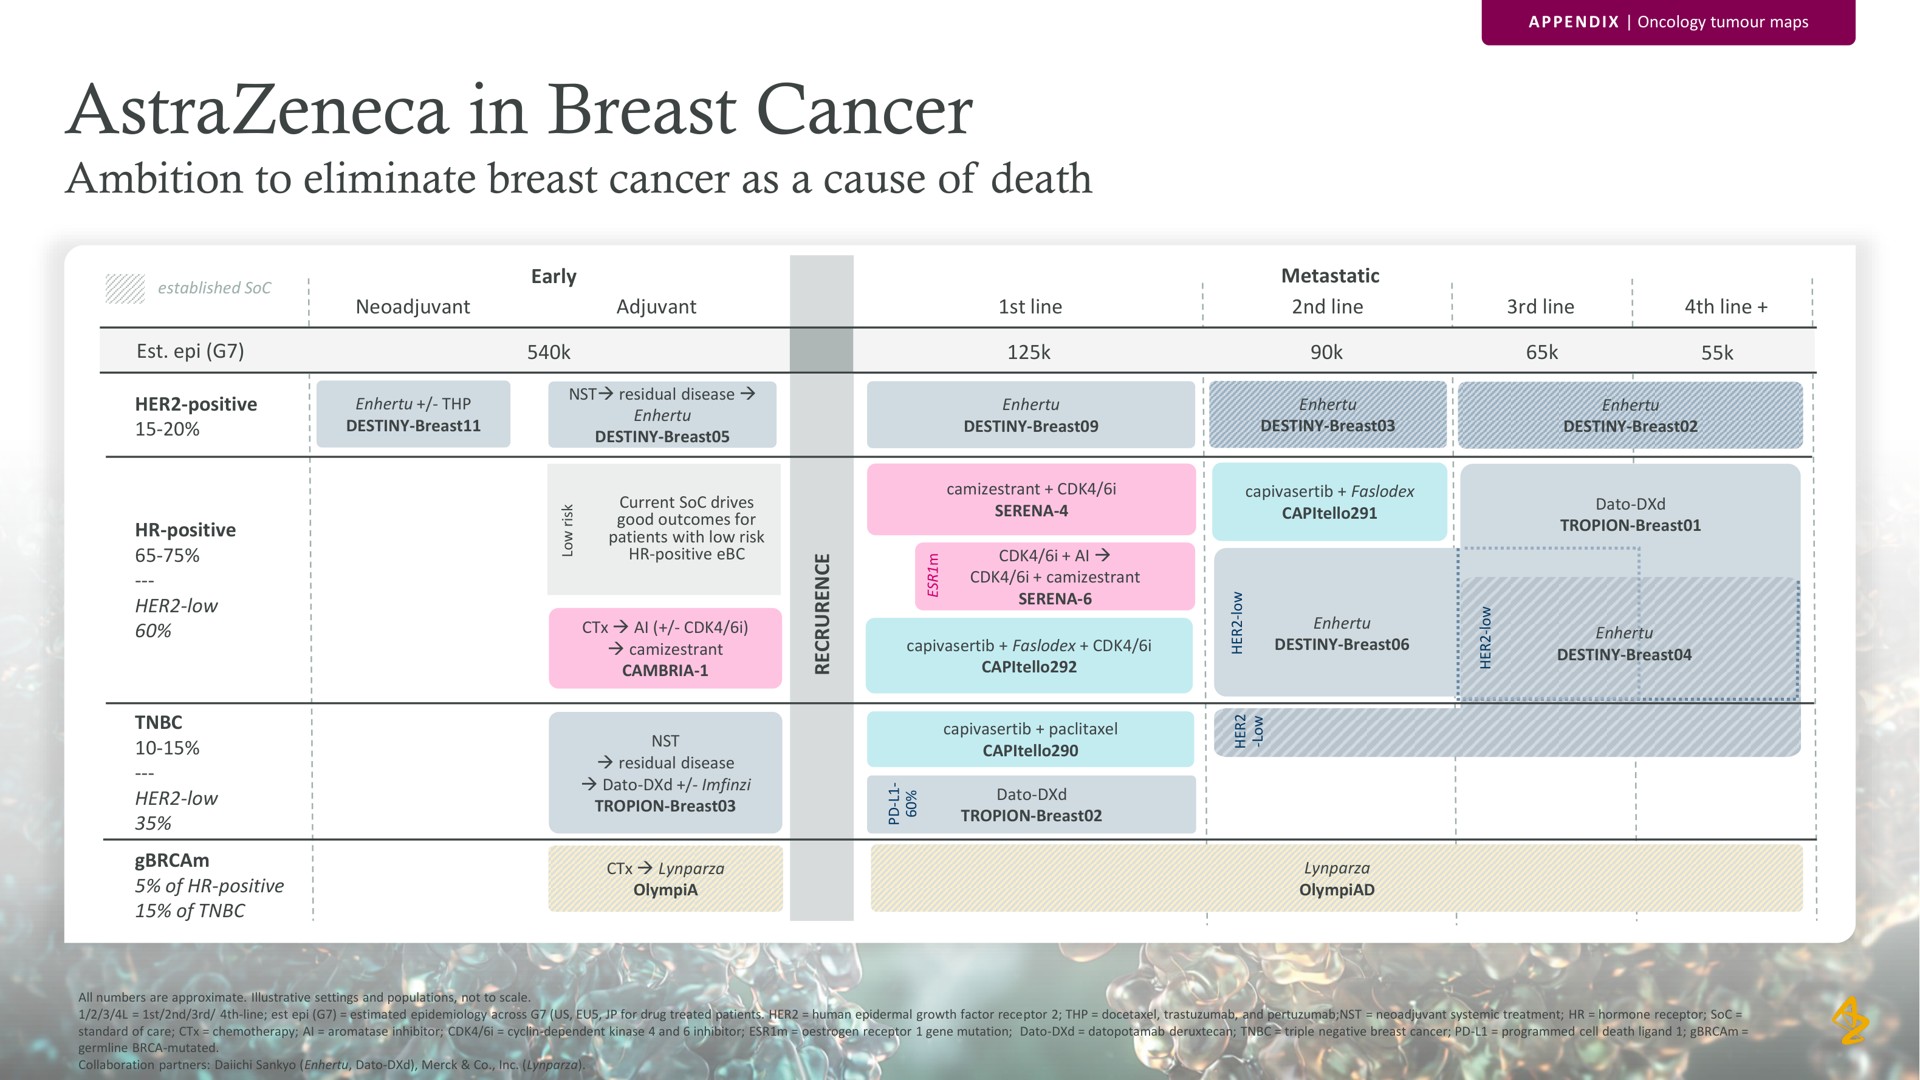 in breast cancer ambition to eliminate breast cancer as a cause of death | AstraZeneca